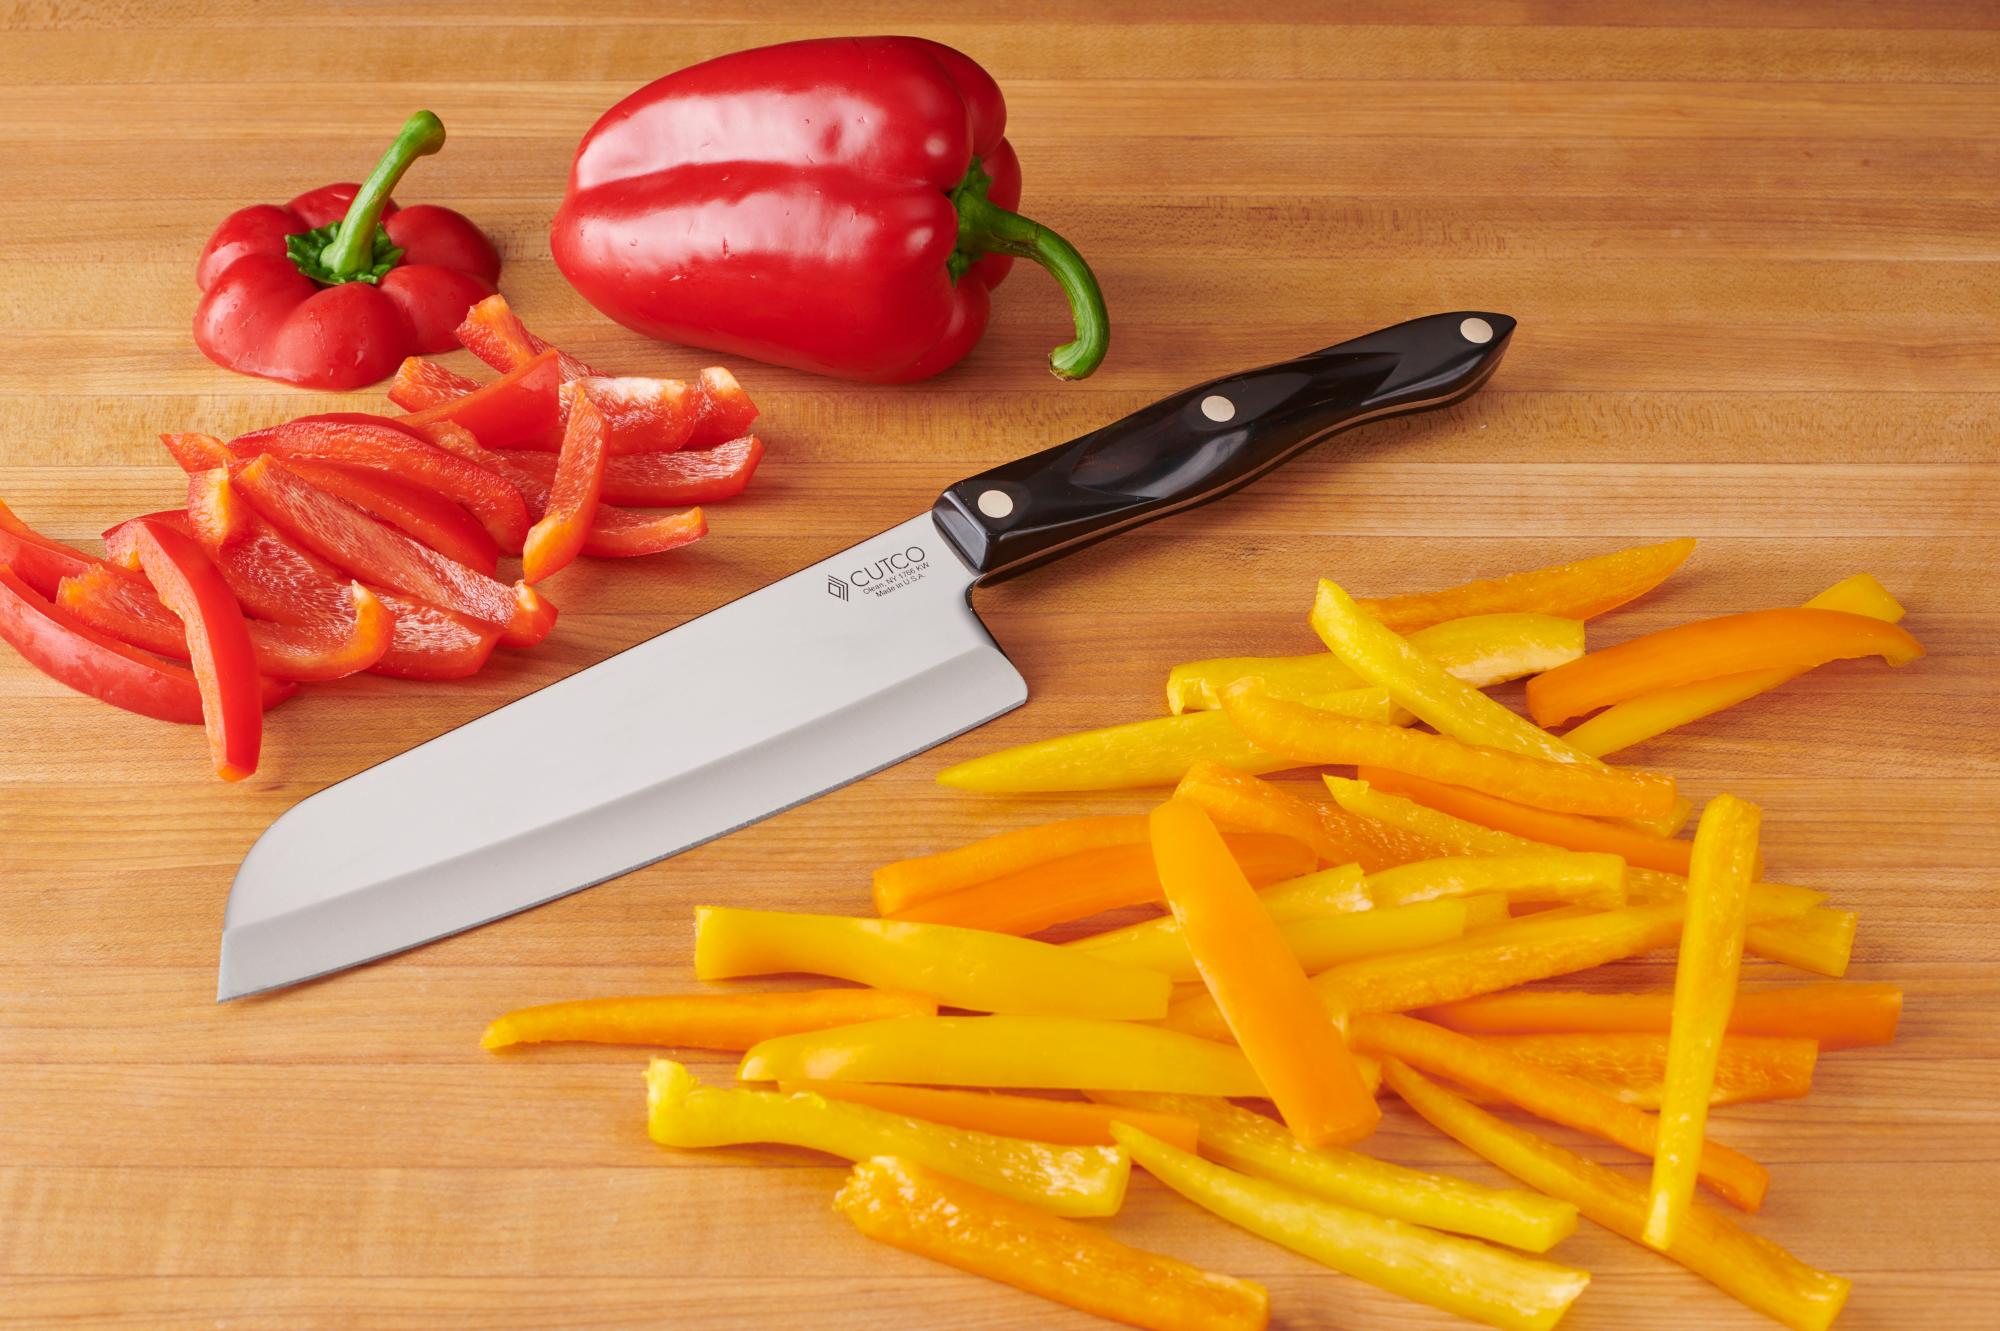 Slicing the peppers with a Santoku.